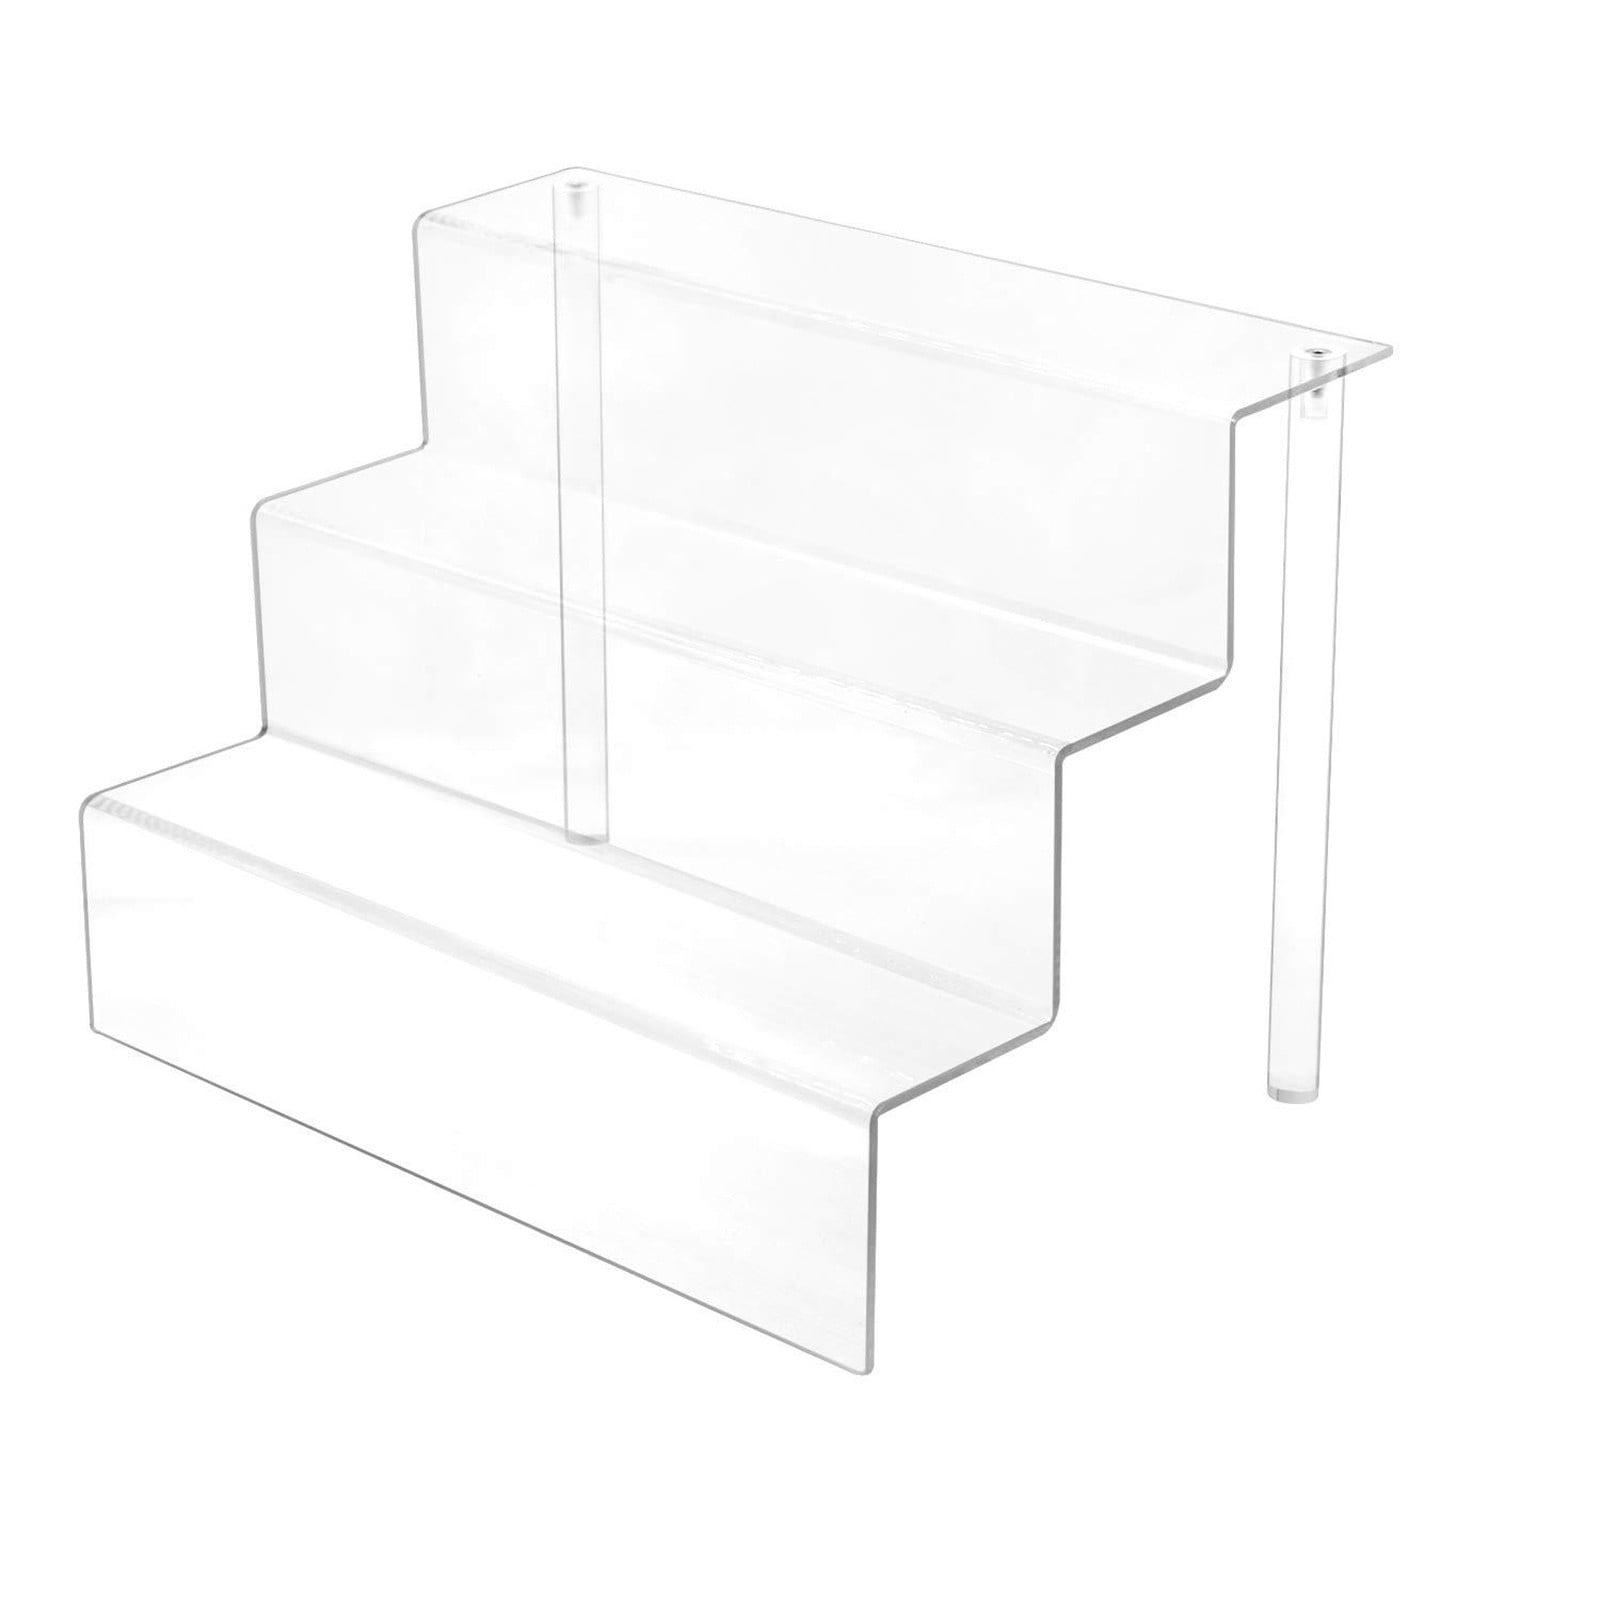 NEW Acrylic Riser Didplay Stand A 